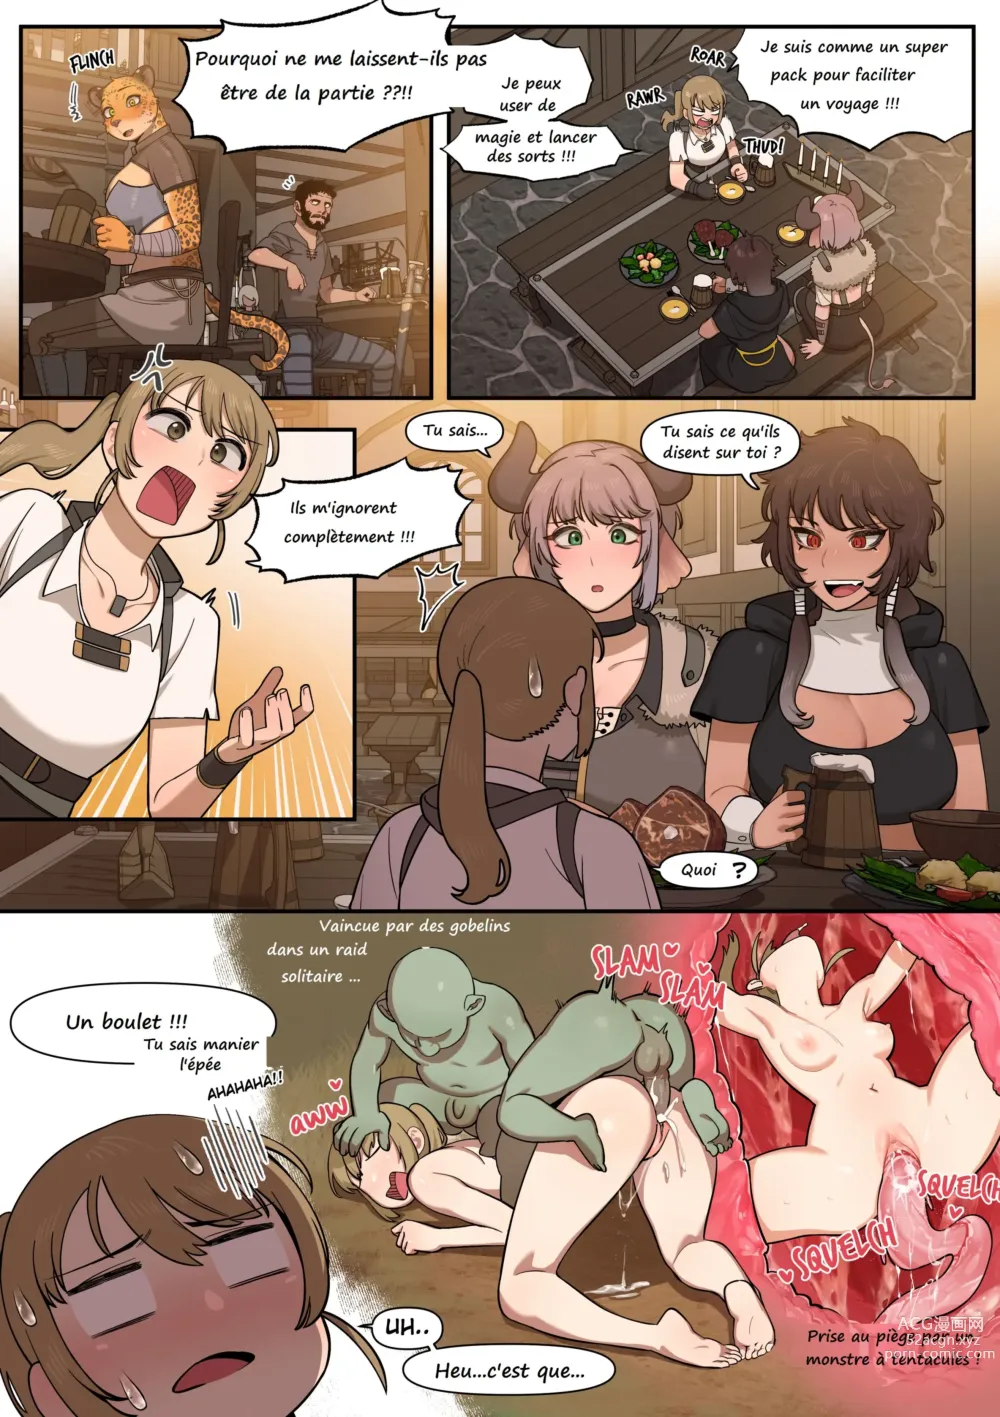 Page 2 of doujinshi You know, I can do it too!